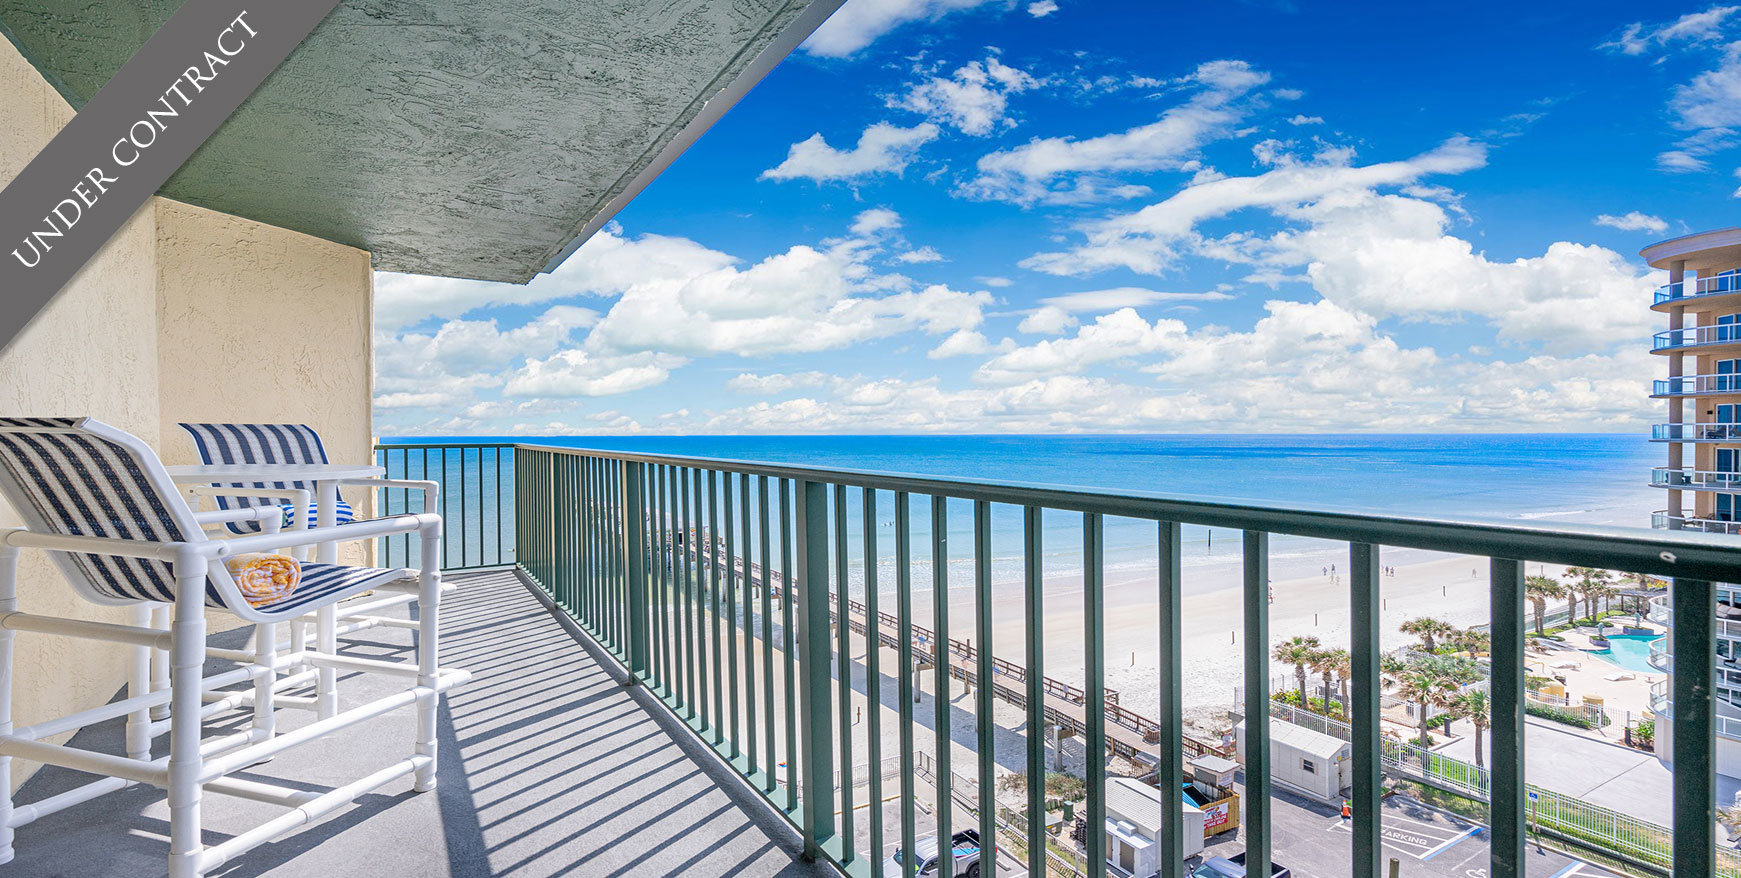 Sunglow oceanfront condos For Sale at 3647 S Atlantic Ave Daytona Beach  Shores The LUXE Group 386-299-4043